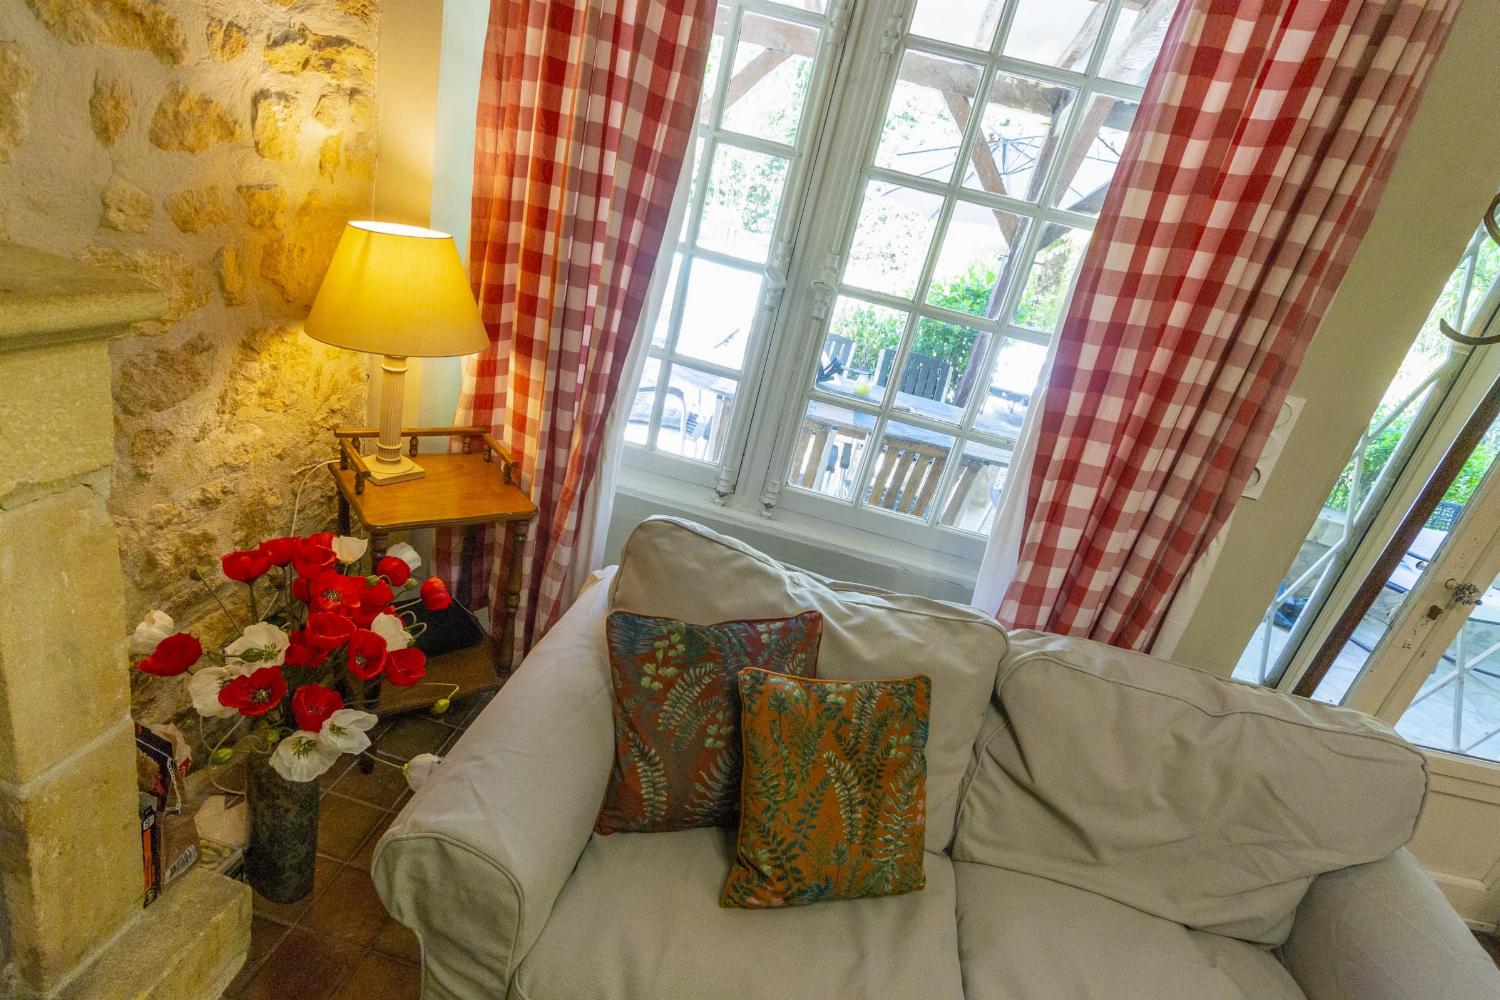 Living room | Holiday home in Sarlat